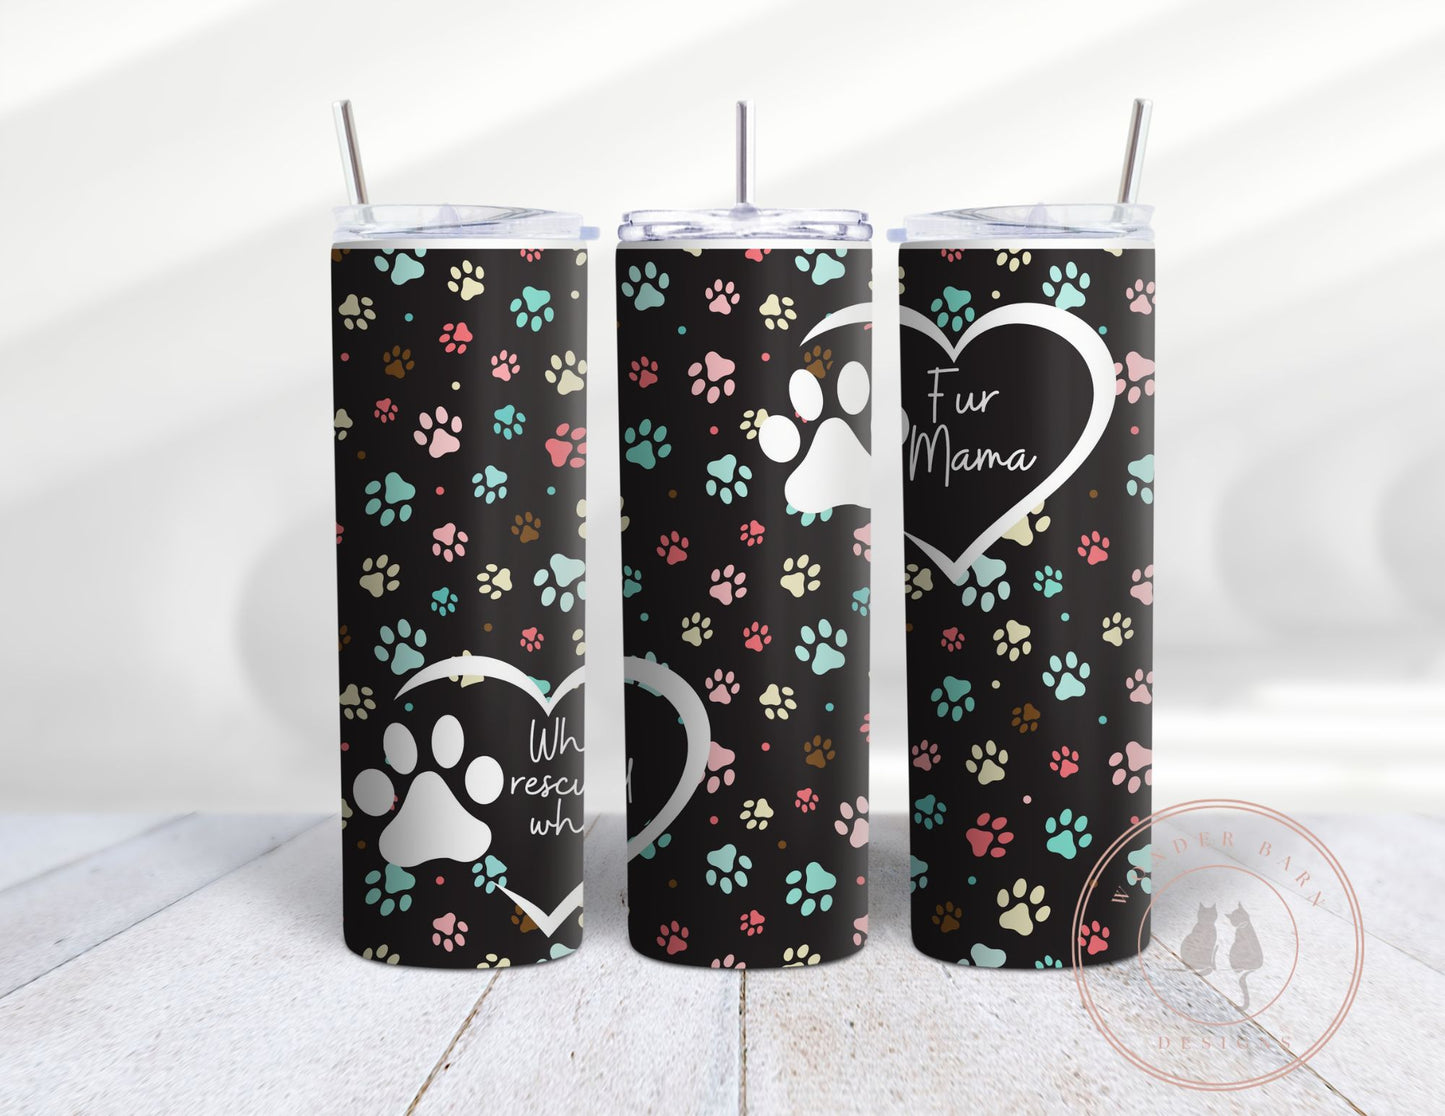 Fur Mama/Who rescued who personalized tumbler 20 oz